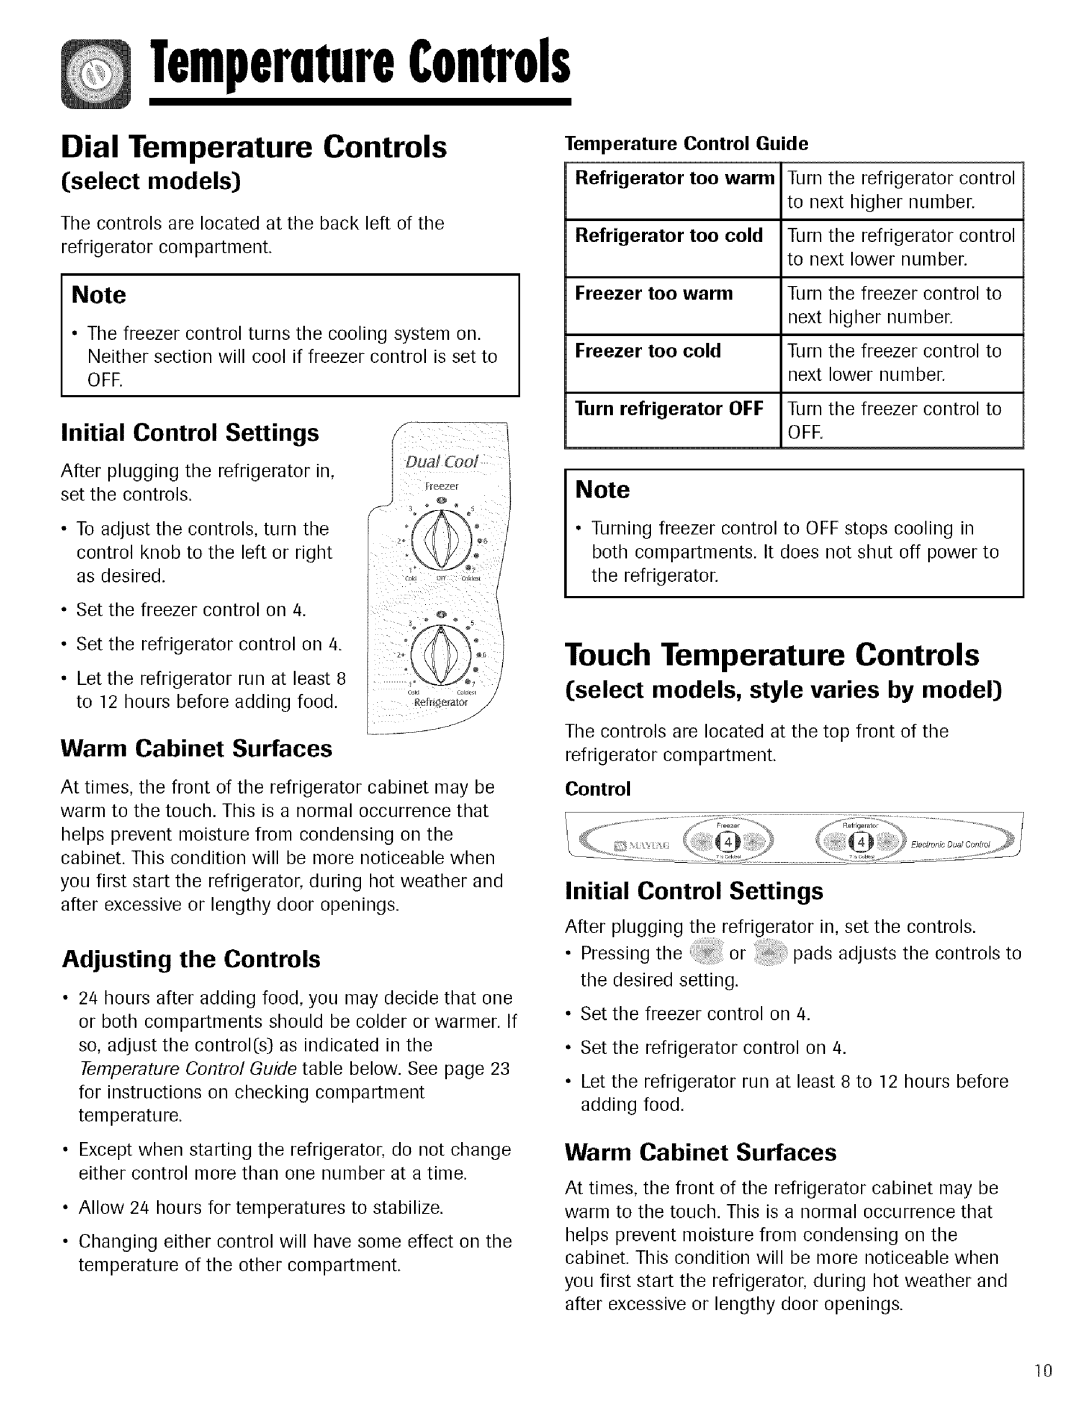 Maytag Refrigerator TemperatureControls, Touch Temperature Controls, Dial Temperature Controls, Warm Cabinet Surfaces 